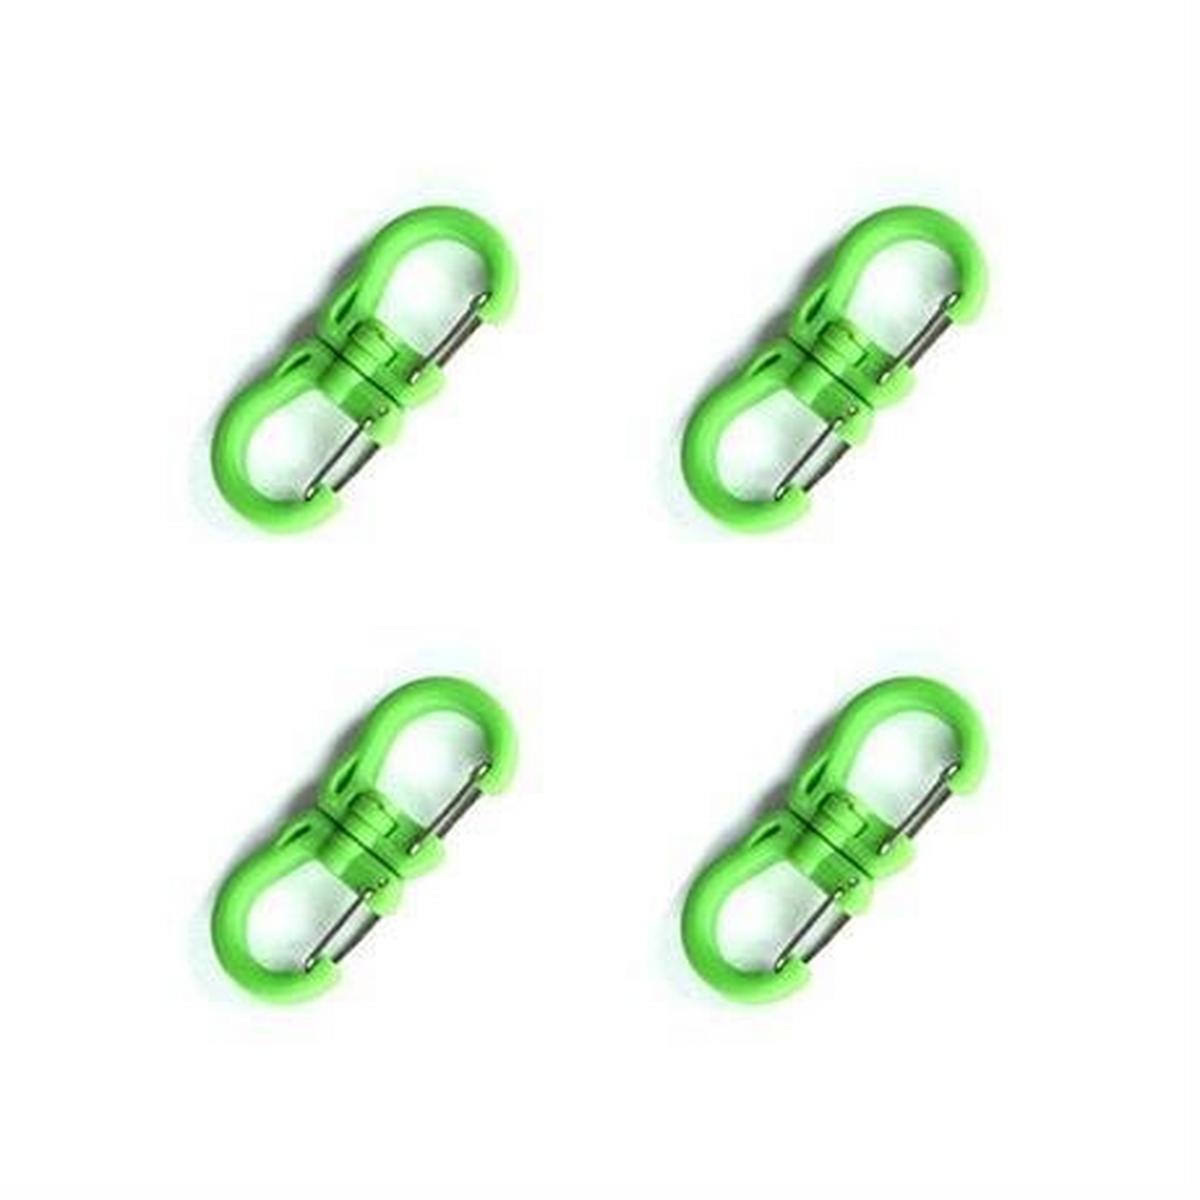 Tyny Tools Swivel Carabiner Clips SMALL Green (Pack of 4)